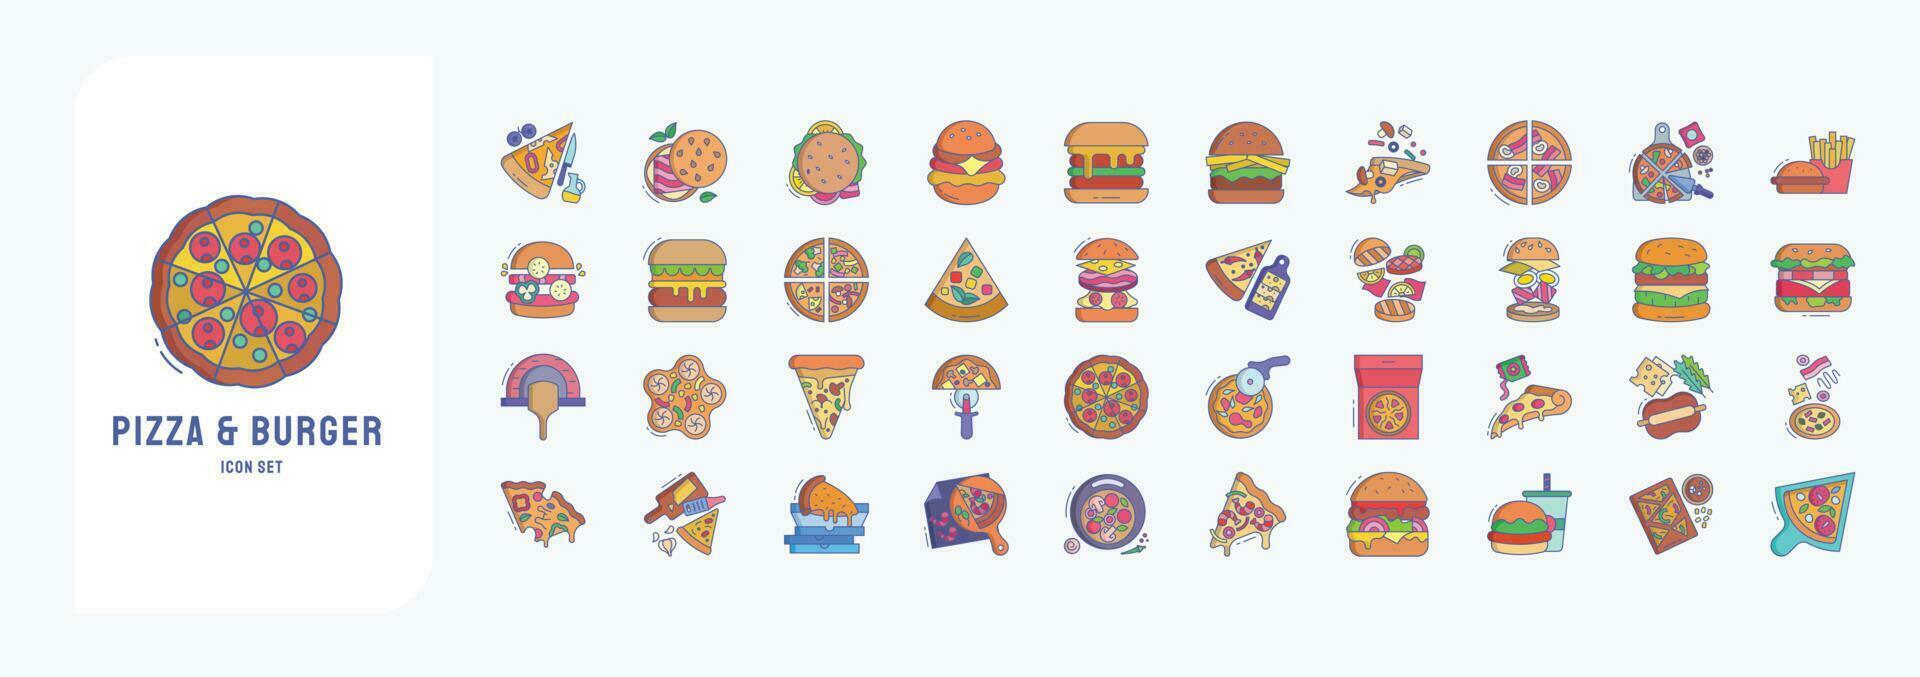 Collection of icons related to Pizza and Burger, including icons like Pizza, fries, burger, Monos and more vector